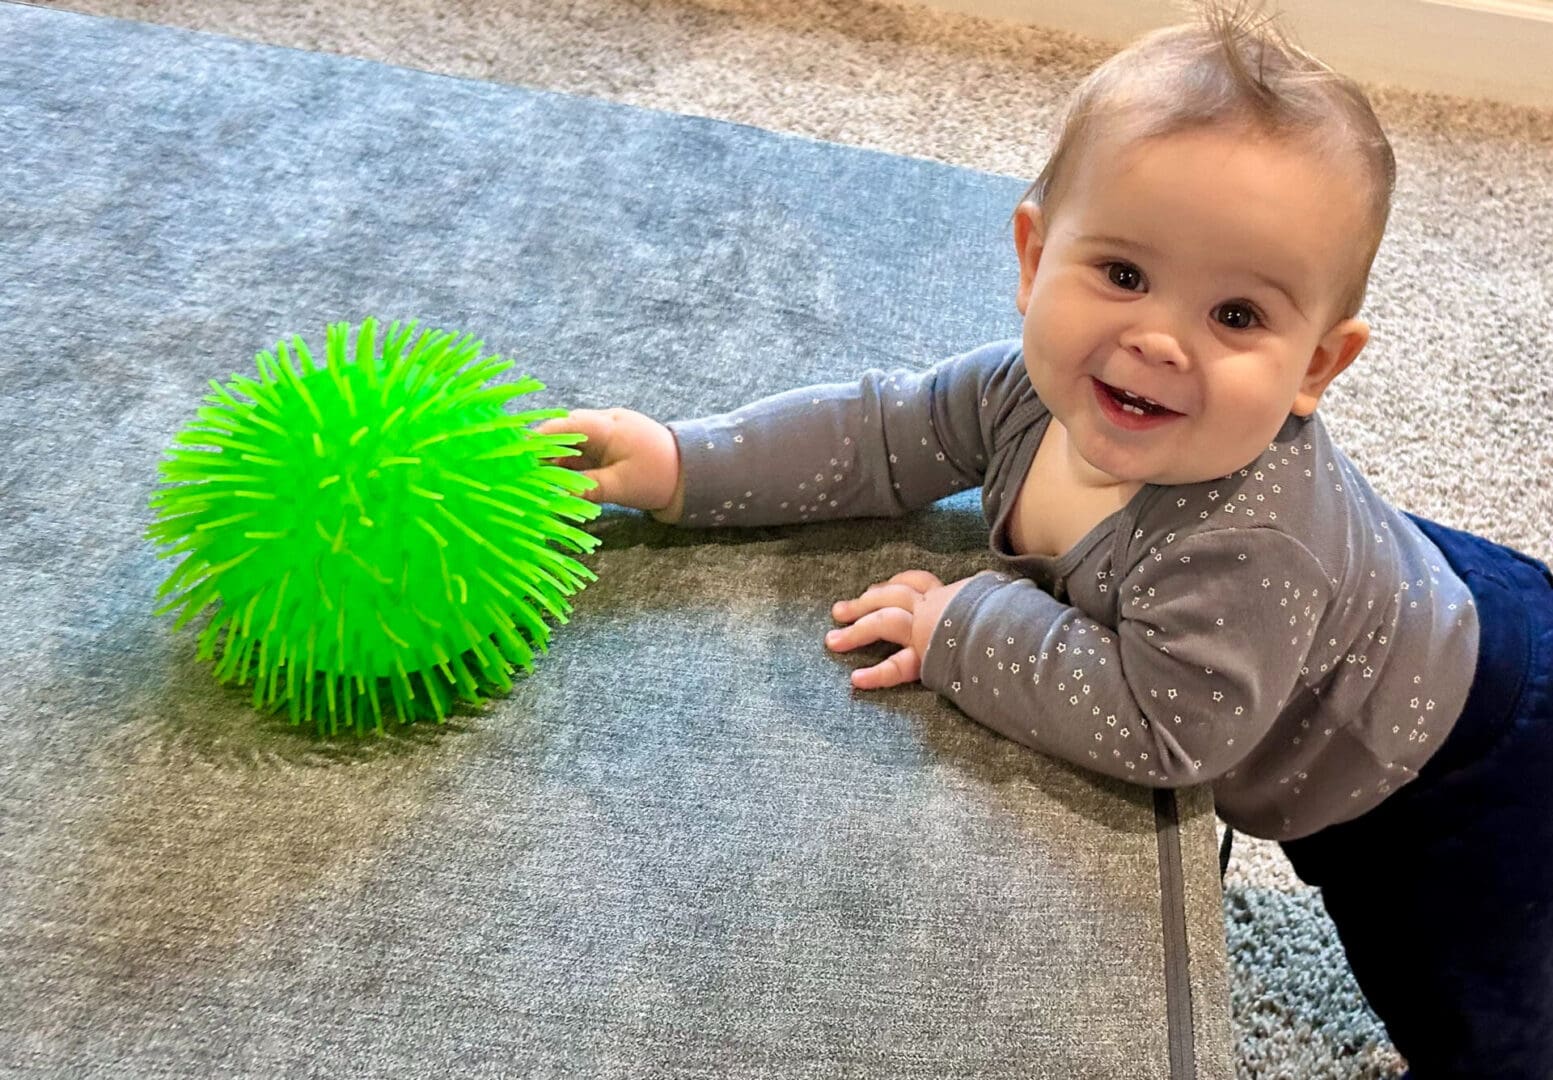 A baby is playing with a green ball.